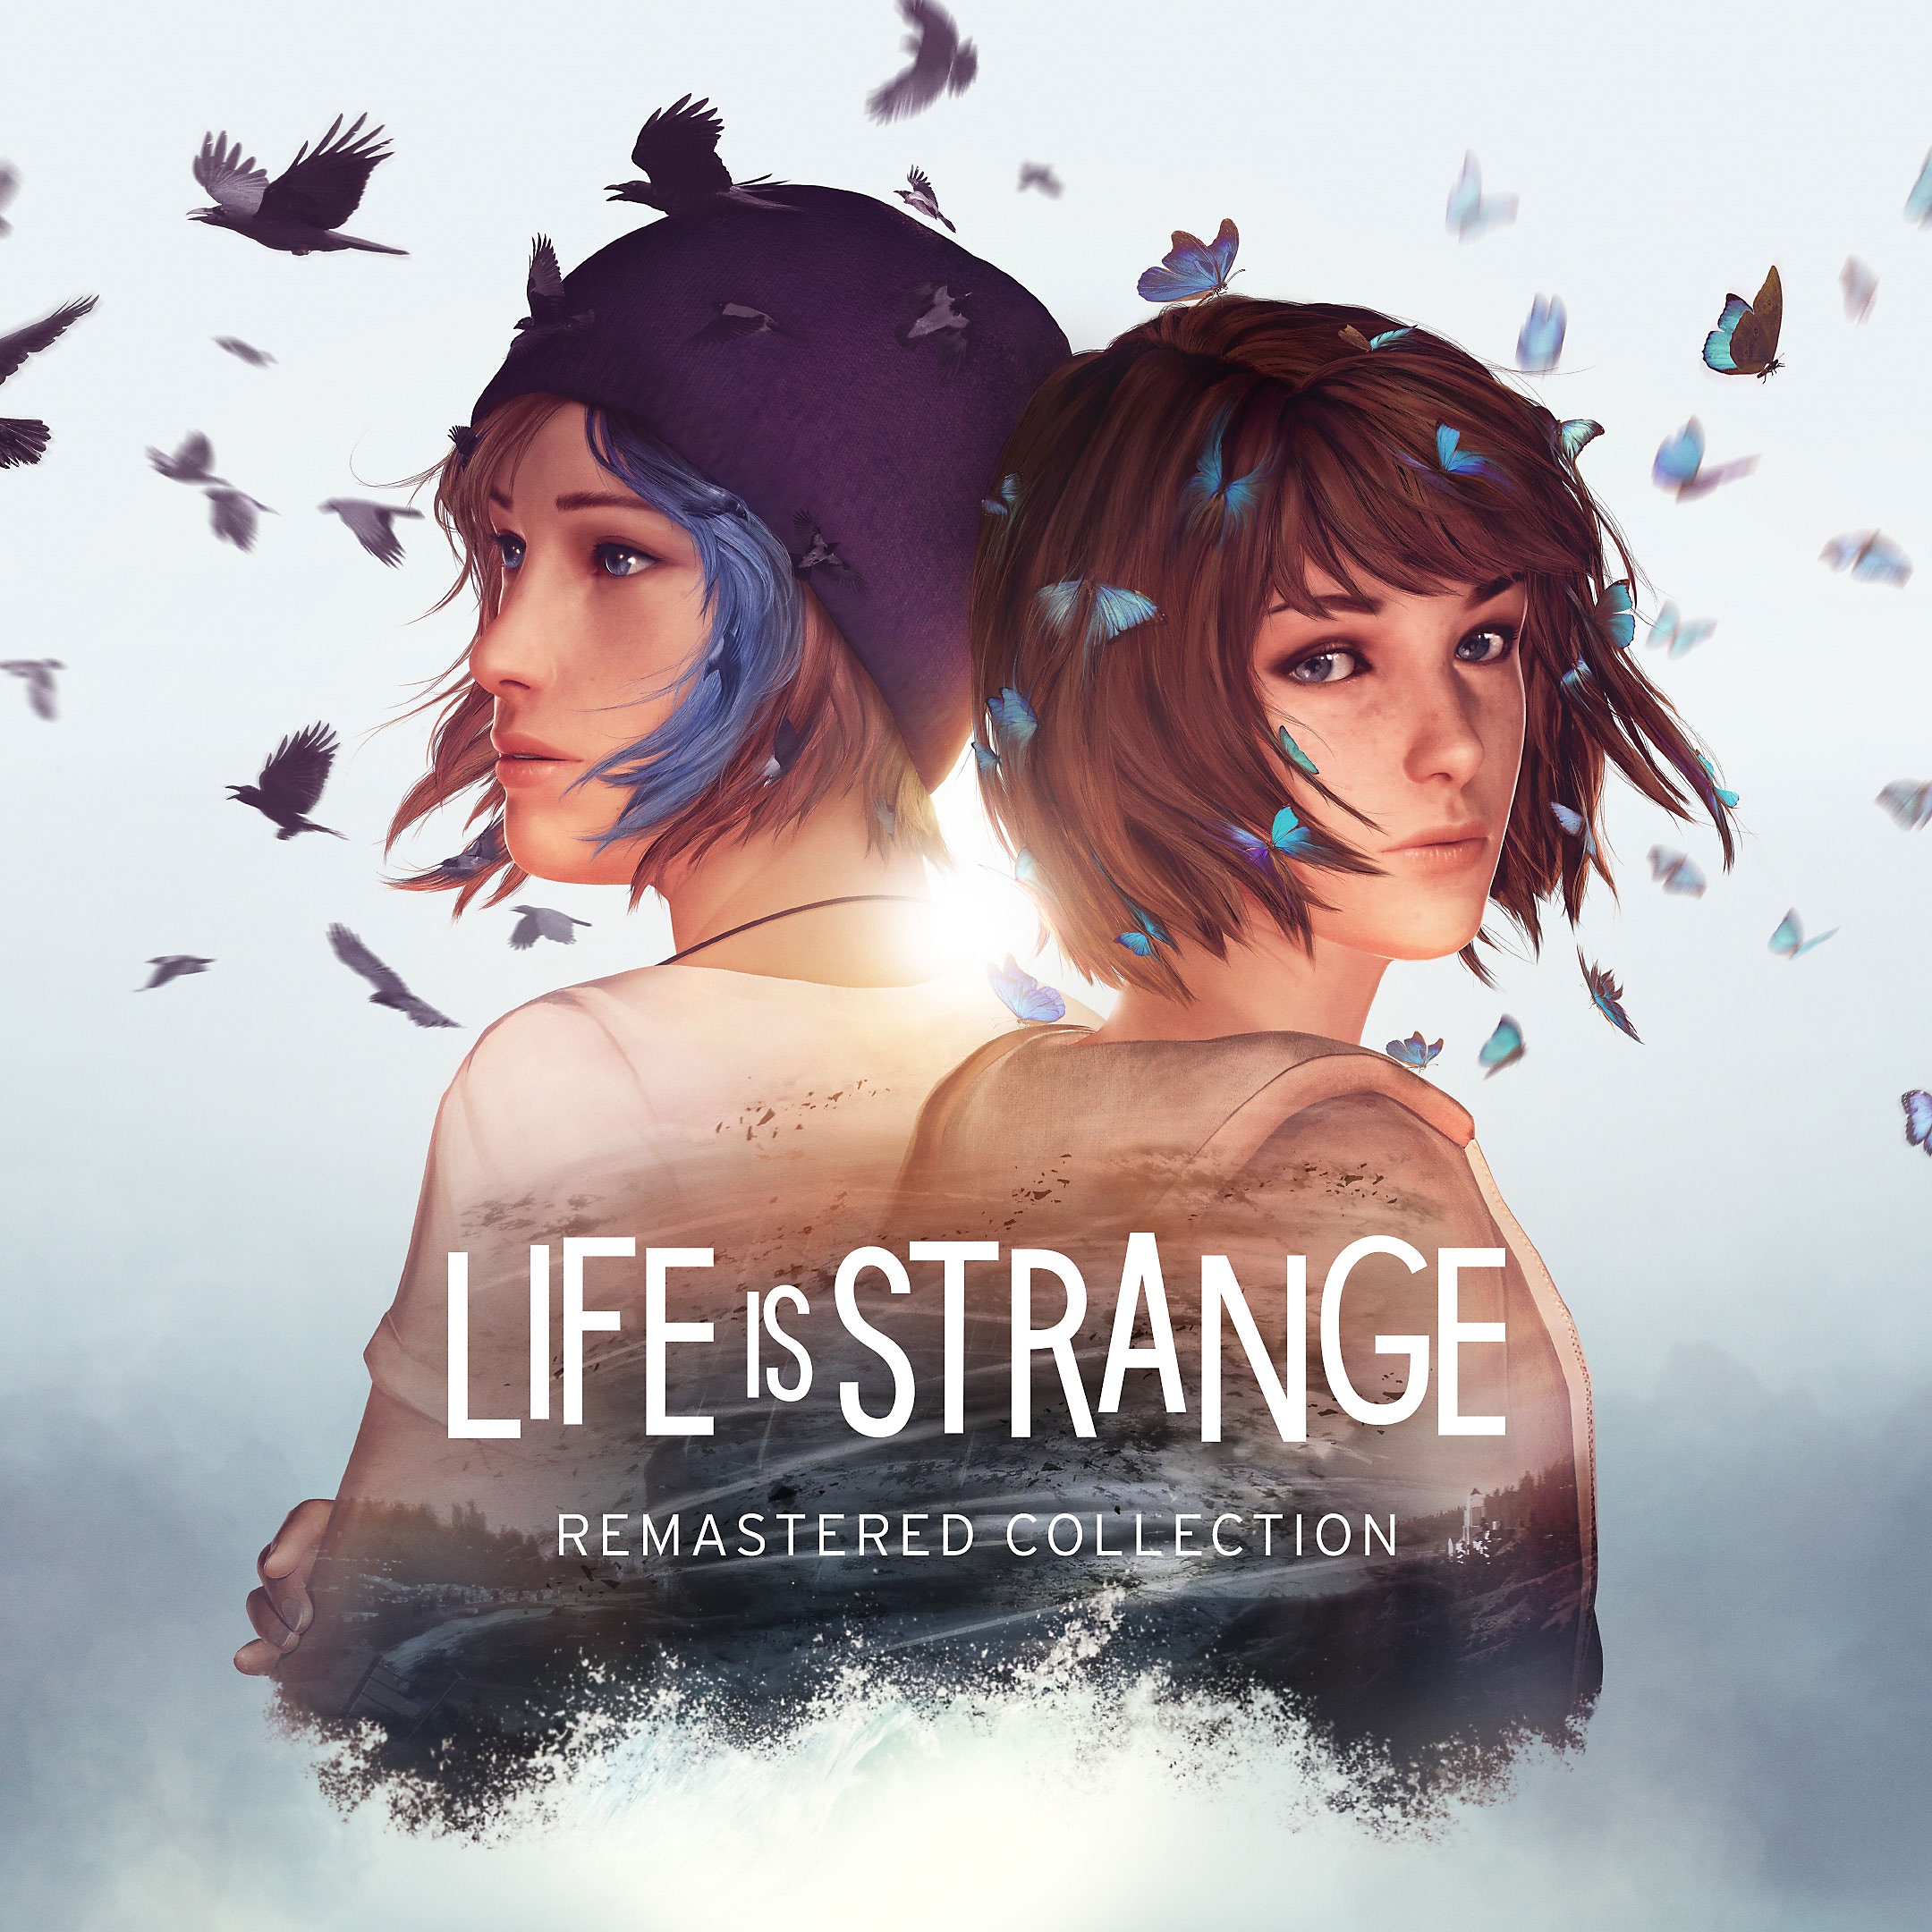 Life Is Strange Remastered Collection - Immagine Store